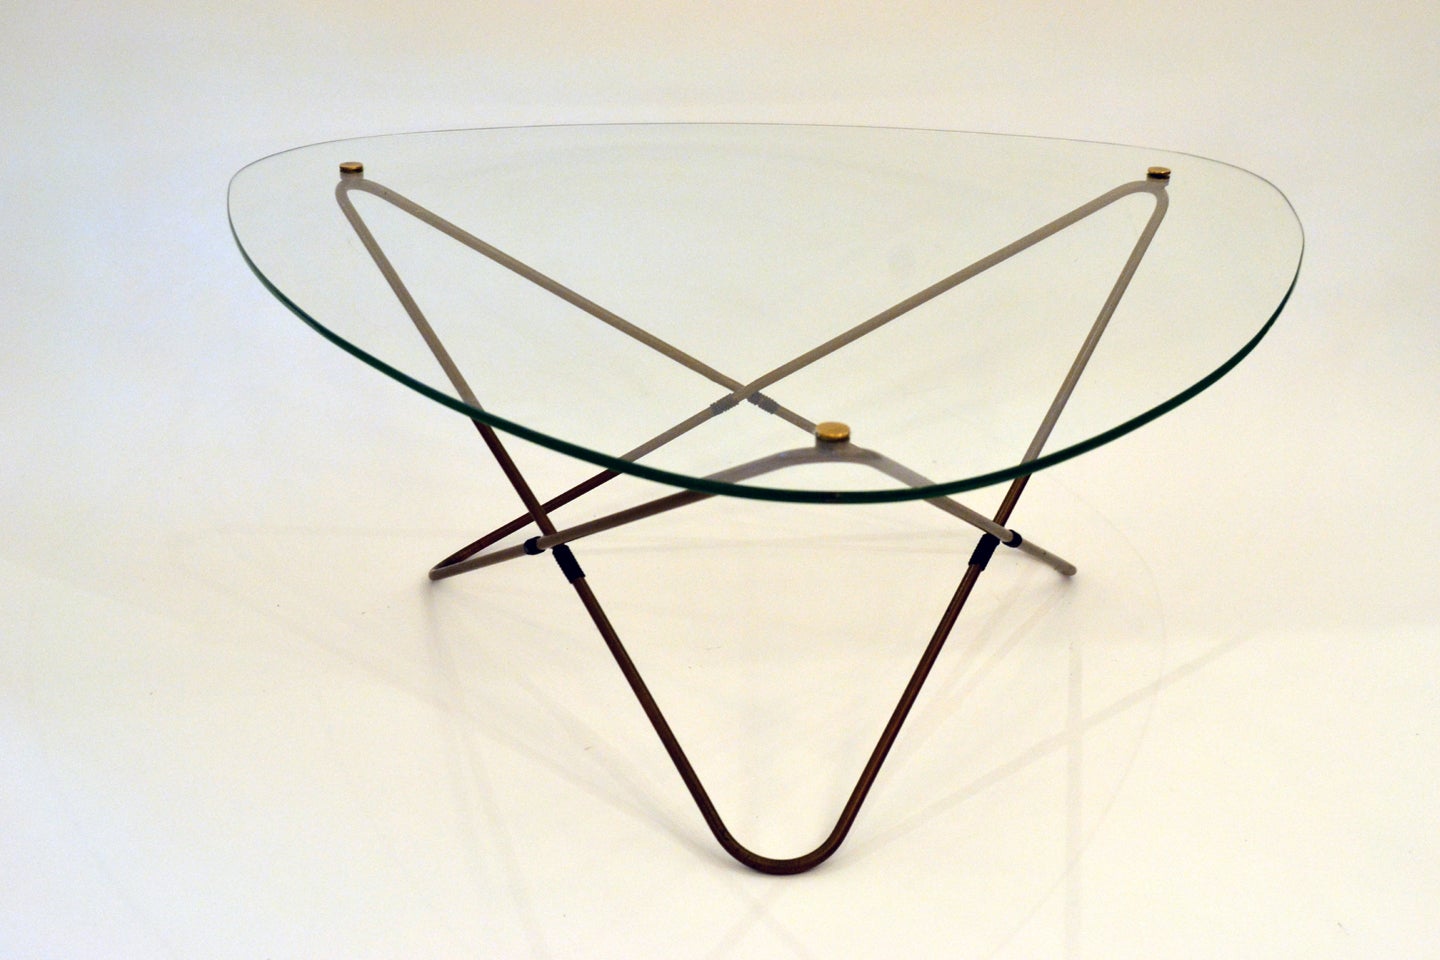 The "Atomic" Mid Century Triangular Coffee Table by Pierre Guariche